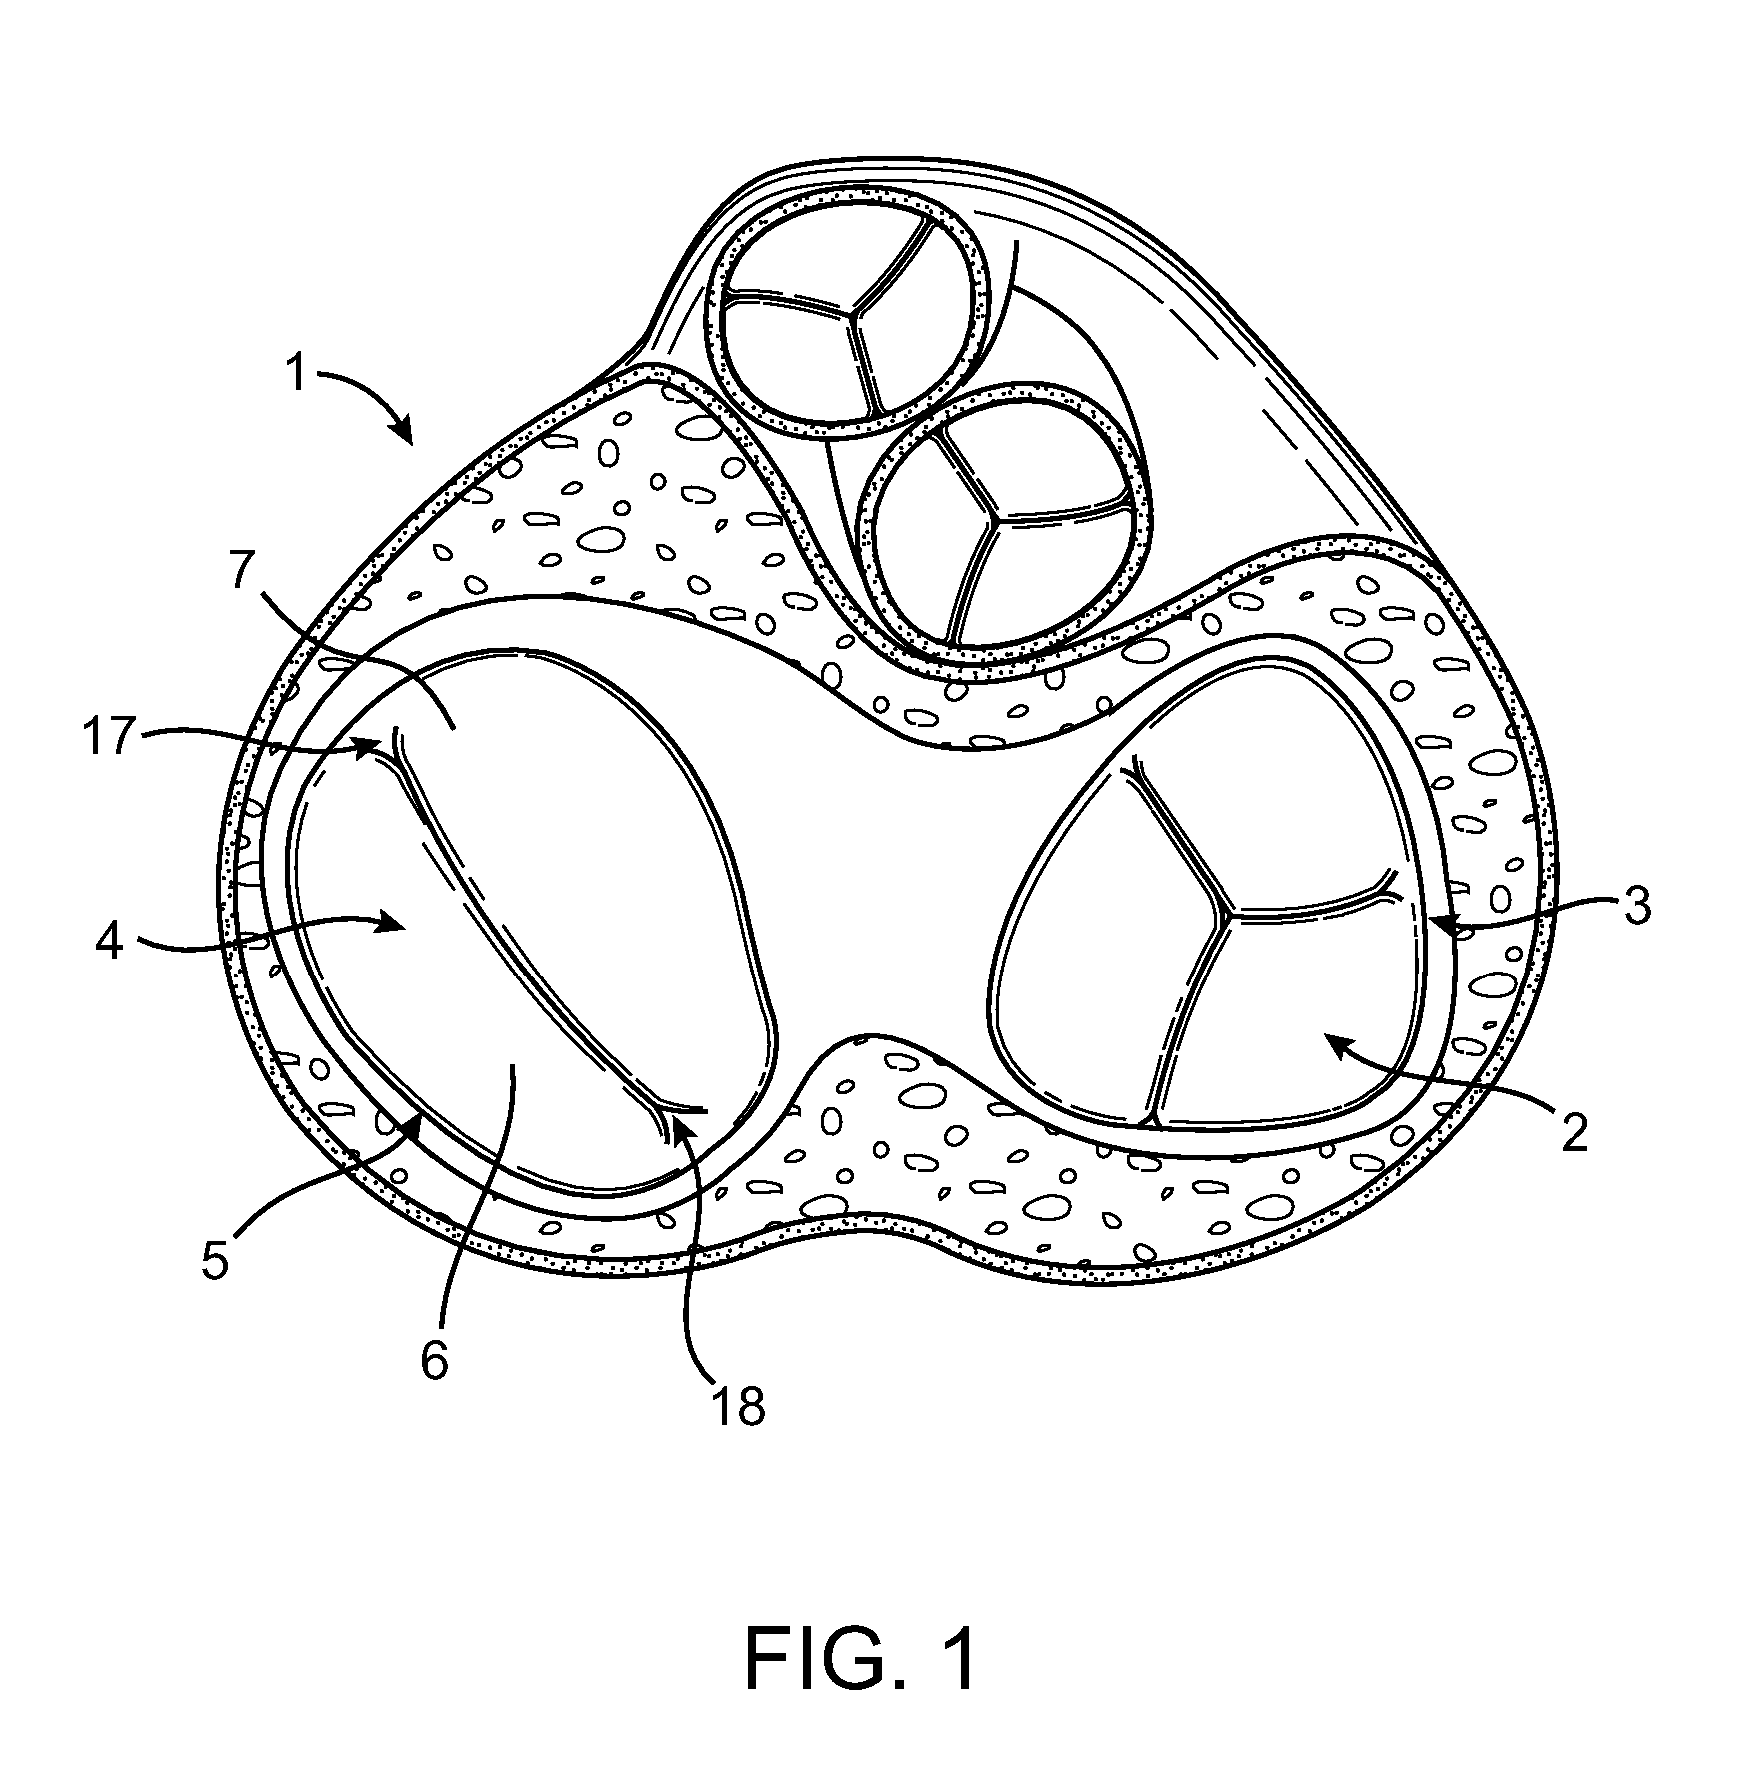 Minimally invasive procedure for implanting an annuloplasty device